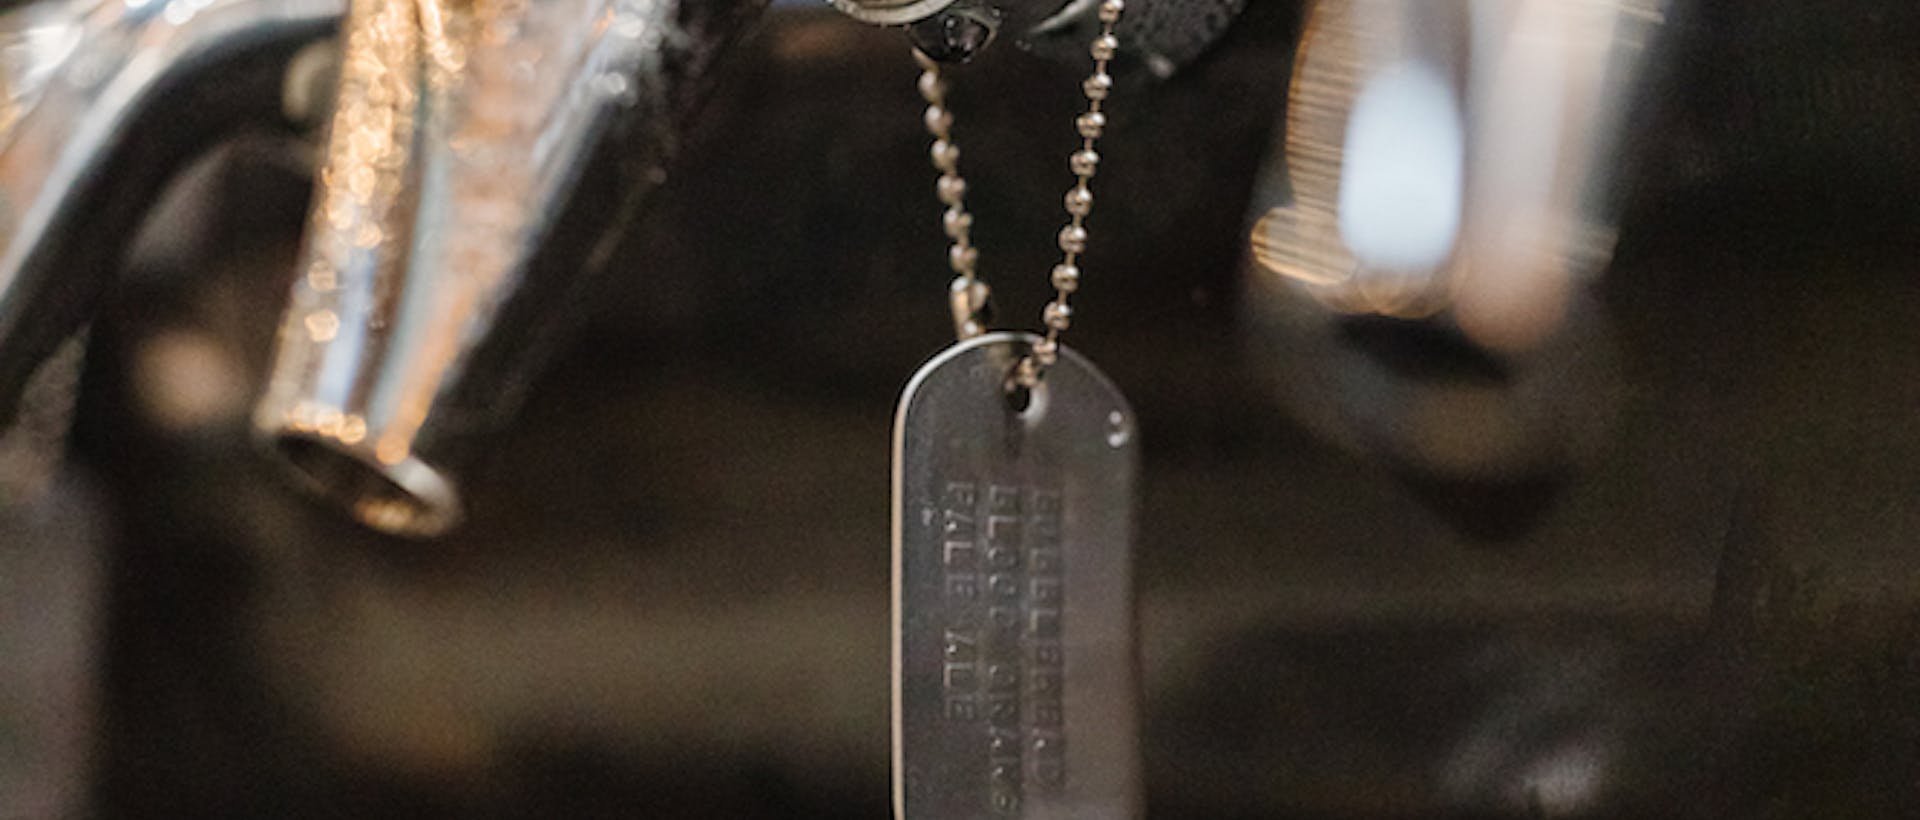 Beer tap adorned with military dog tag